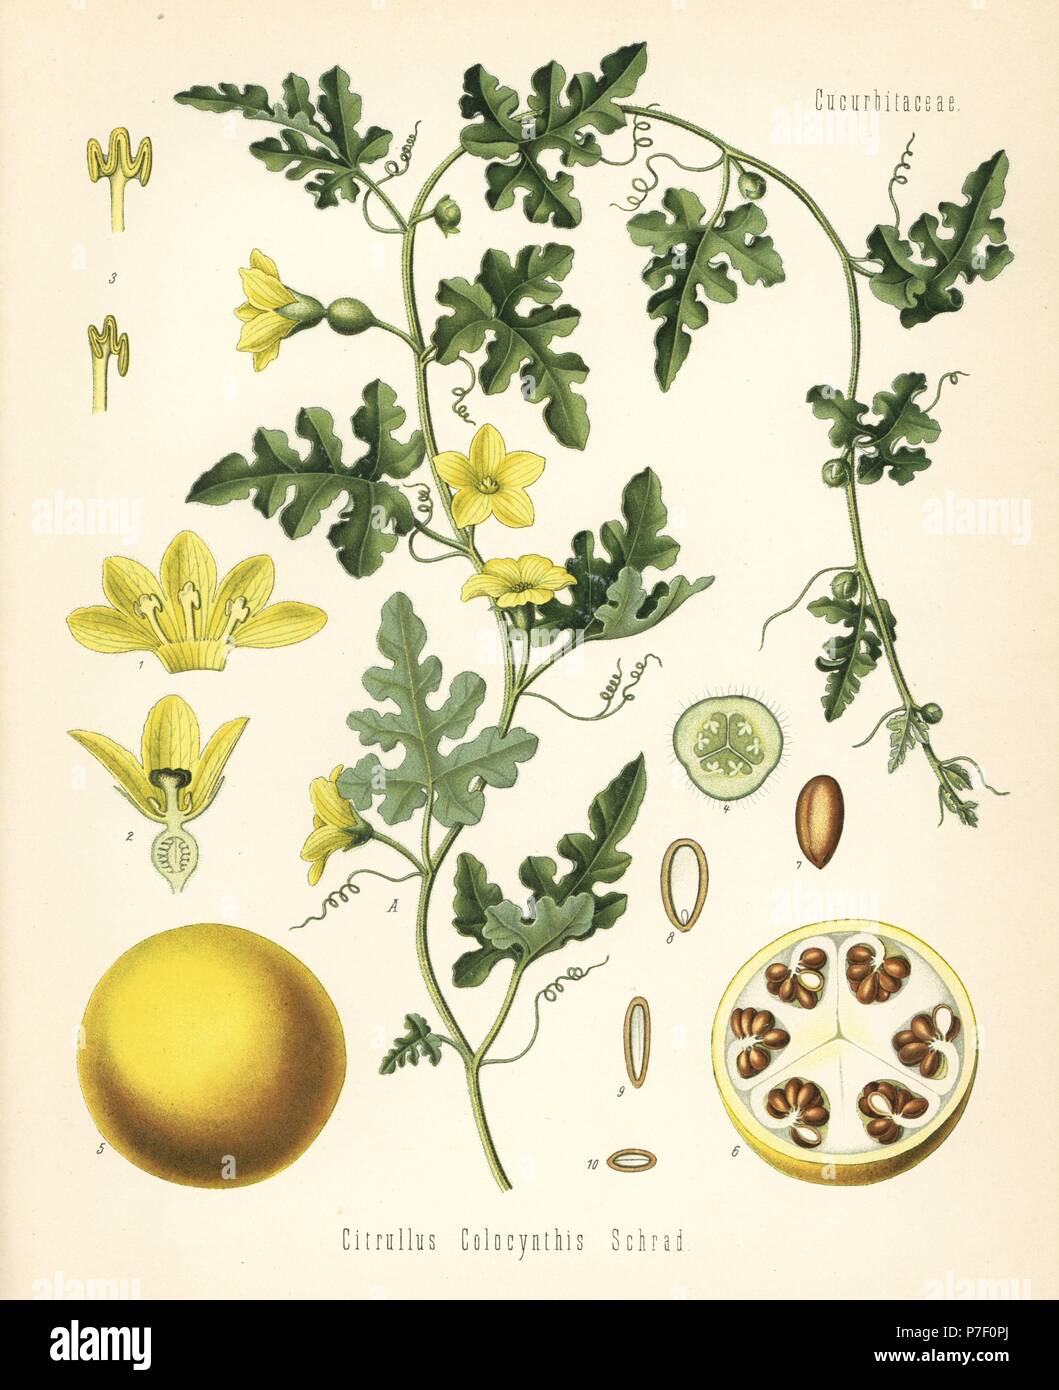 Colocynth or bitter apple, Citrullus colocynthis. Chromolithograph after a botanical illustration from Hermann Adolph Koehler's Medicinal Plants, edited by Gustav Pabst, Koehler, Germany, 1887. Stock Photo